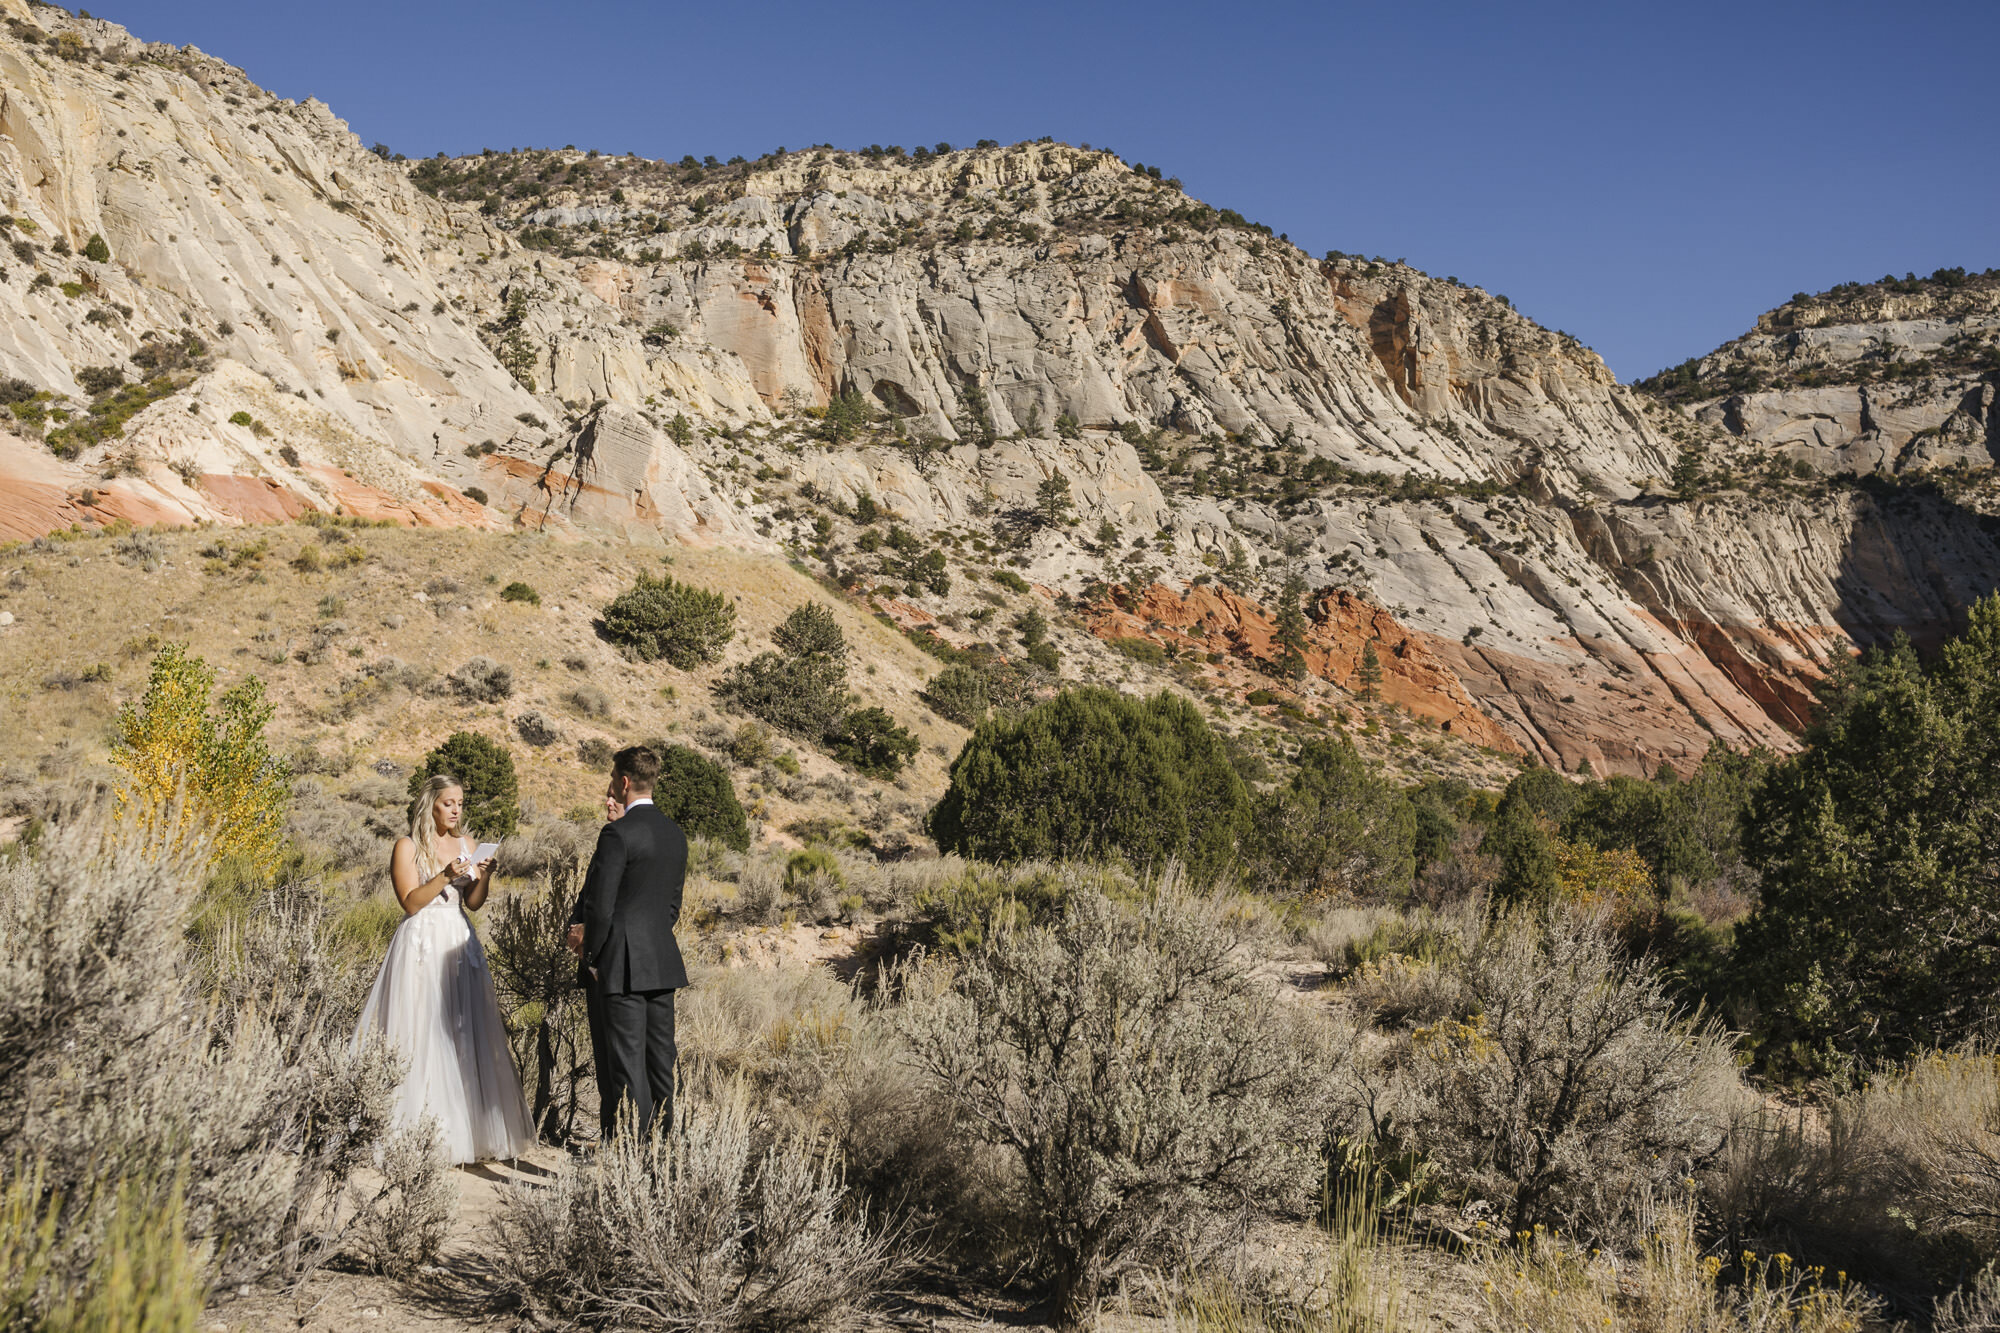 Bride and groom exchange wedding vows at an epic canyon location in the Utah desert